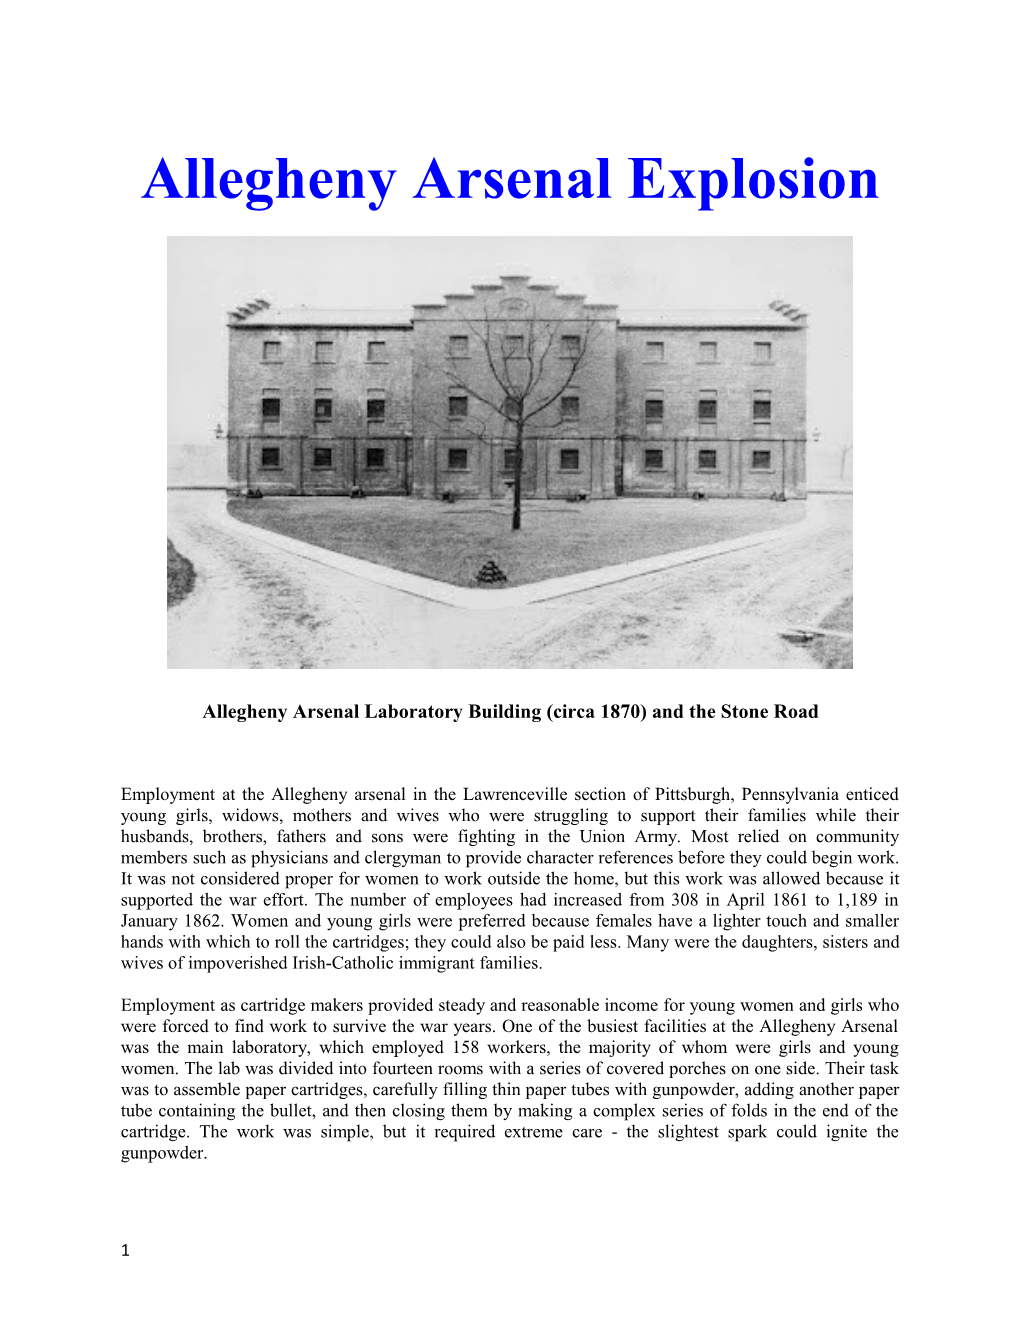 Allegheny Arsenal Laboratory Building (Circa 1870) and the Stone Road